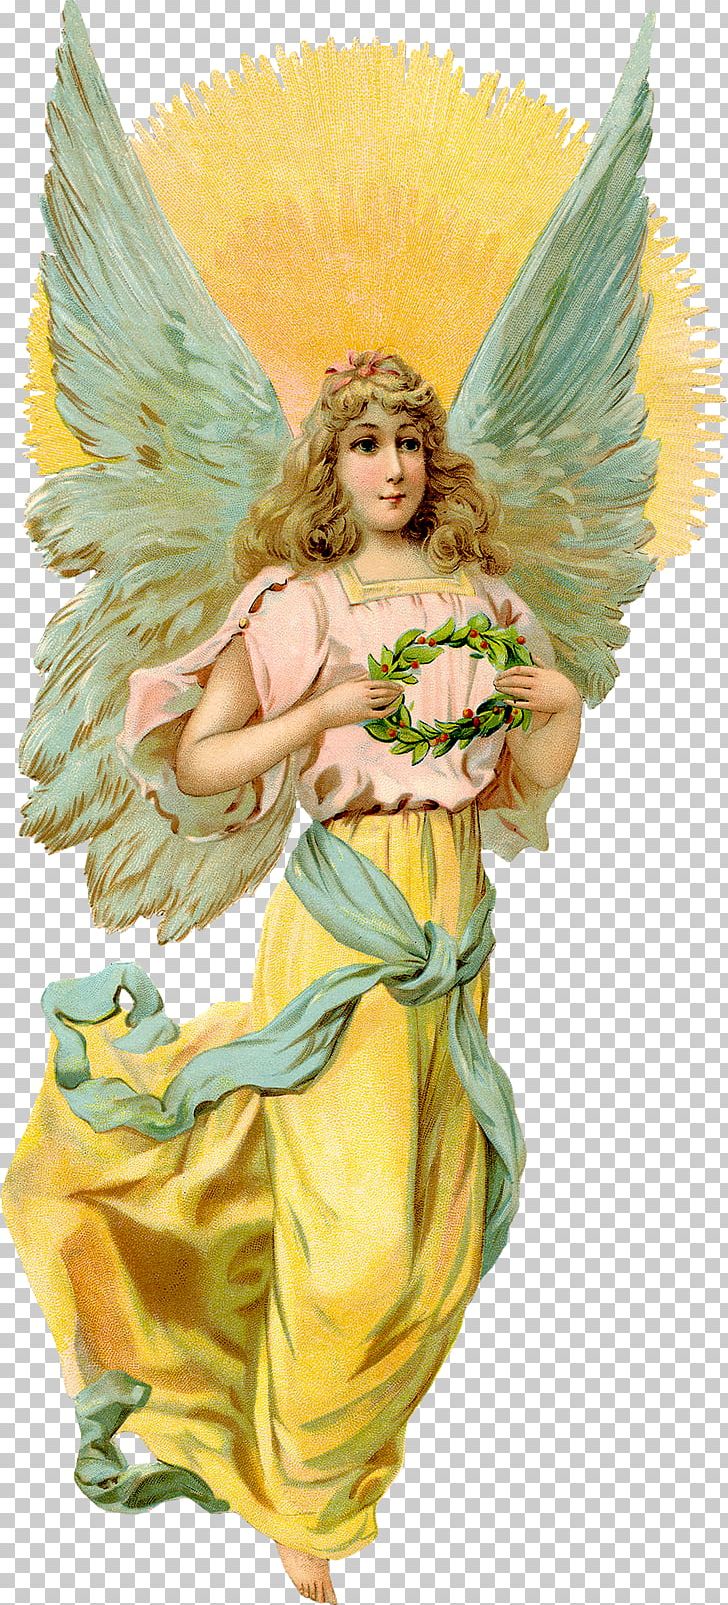 Mythology Legendary Creature Fairy Character Supernatural PNG, Clipart, Angel, Blue, Character, Fairy, Fantasy Free PNG Download